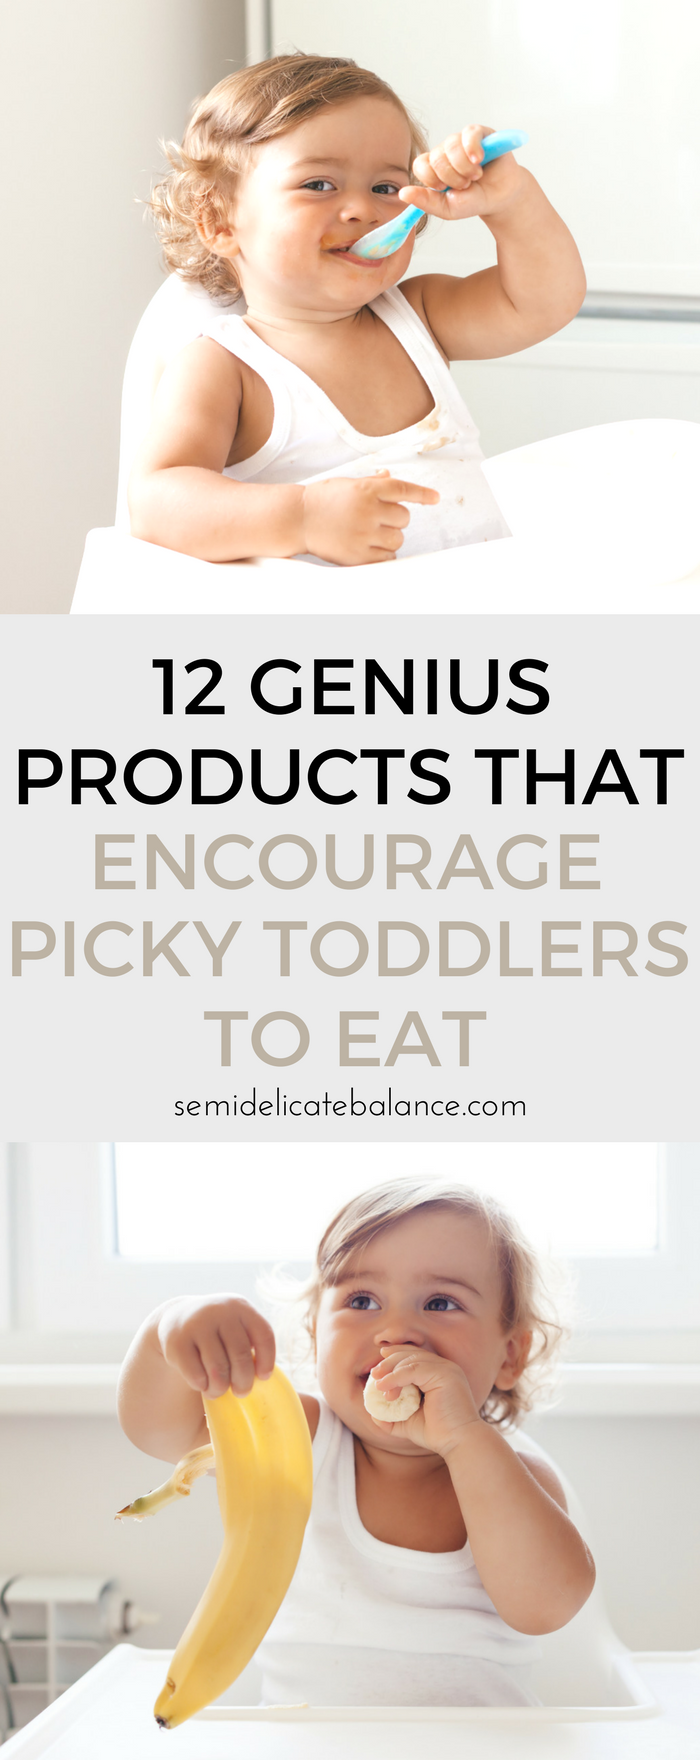 12 Genius Products That Encourage Picky Toddlers to Eat, new mom, parenting, motherhood